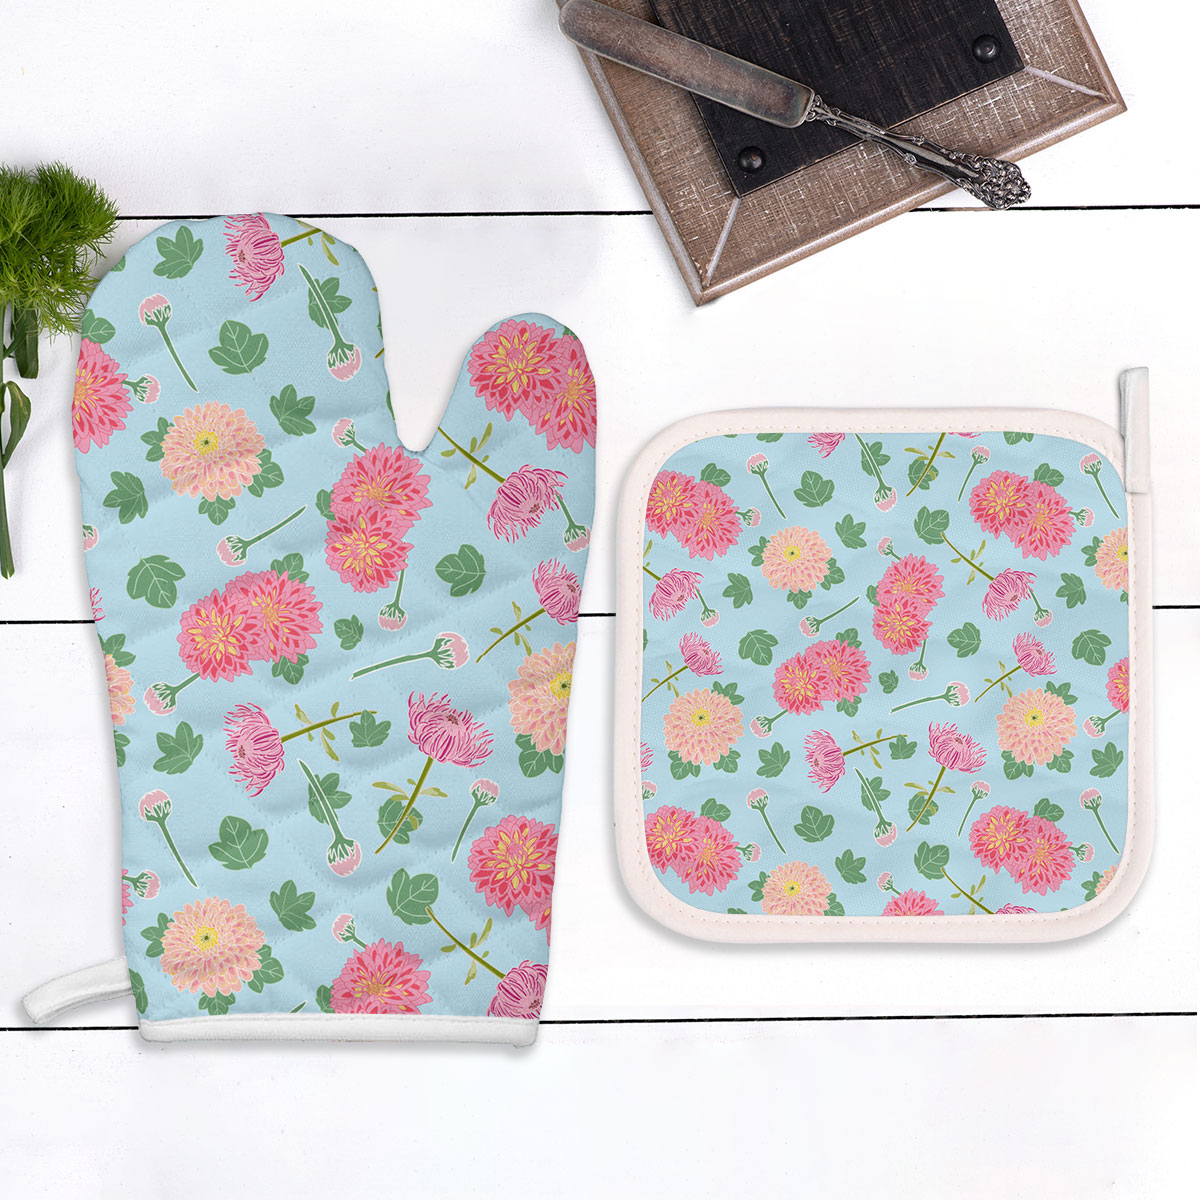 Pink Chrysanthemum Flowers And Leaves Oven Mitts Pot Holder Set